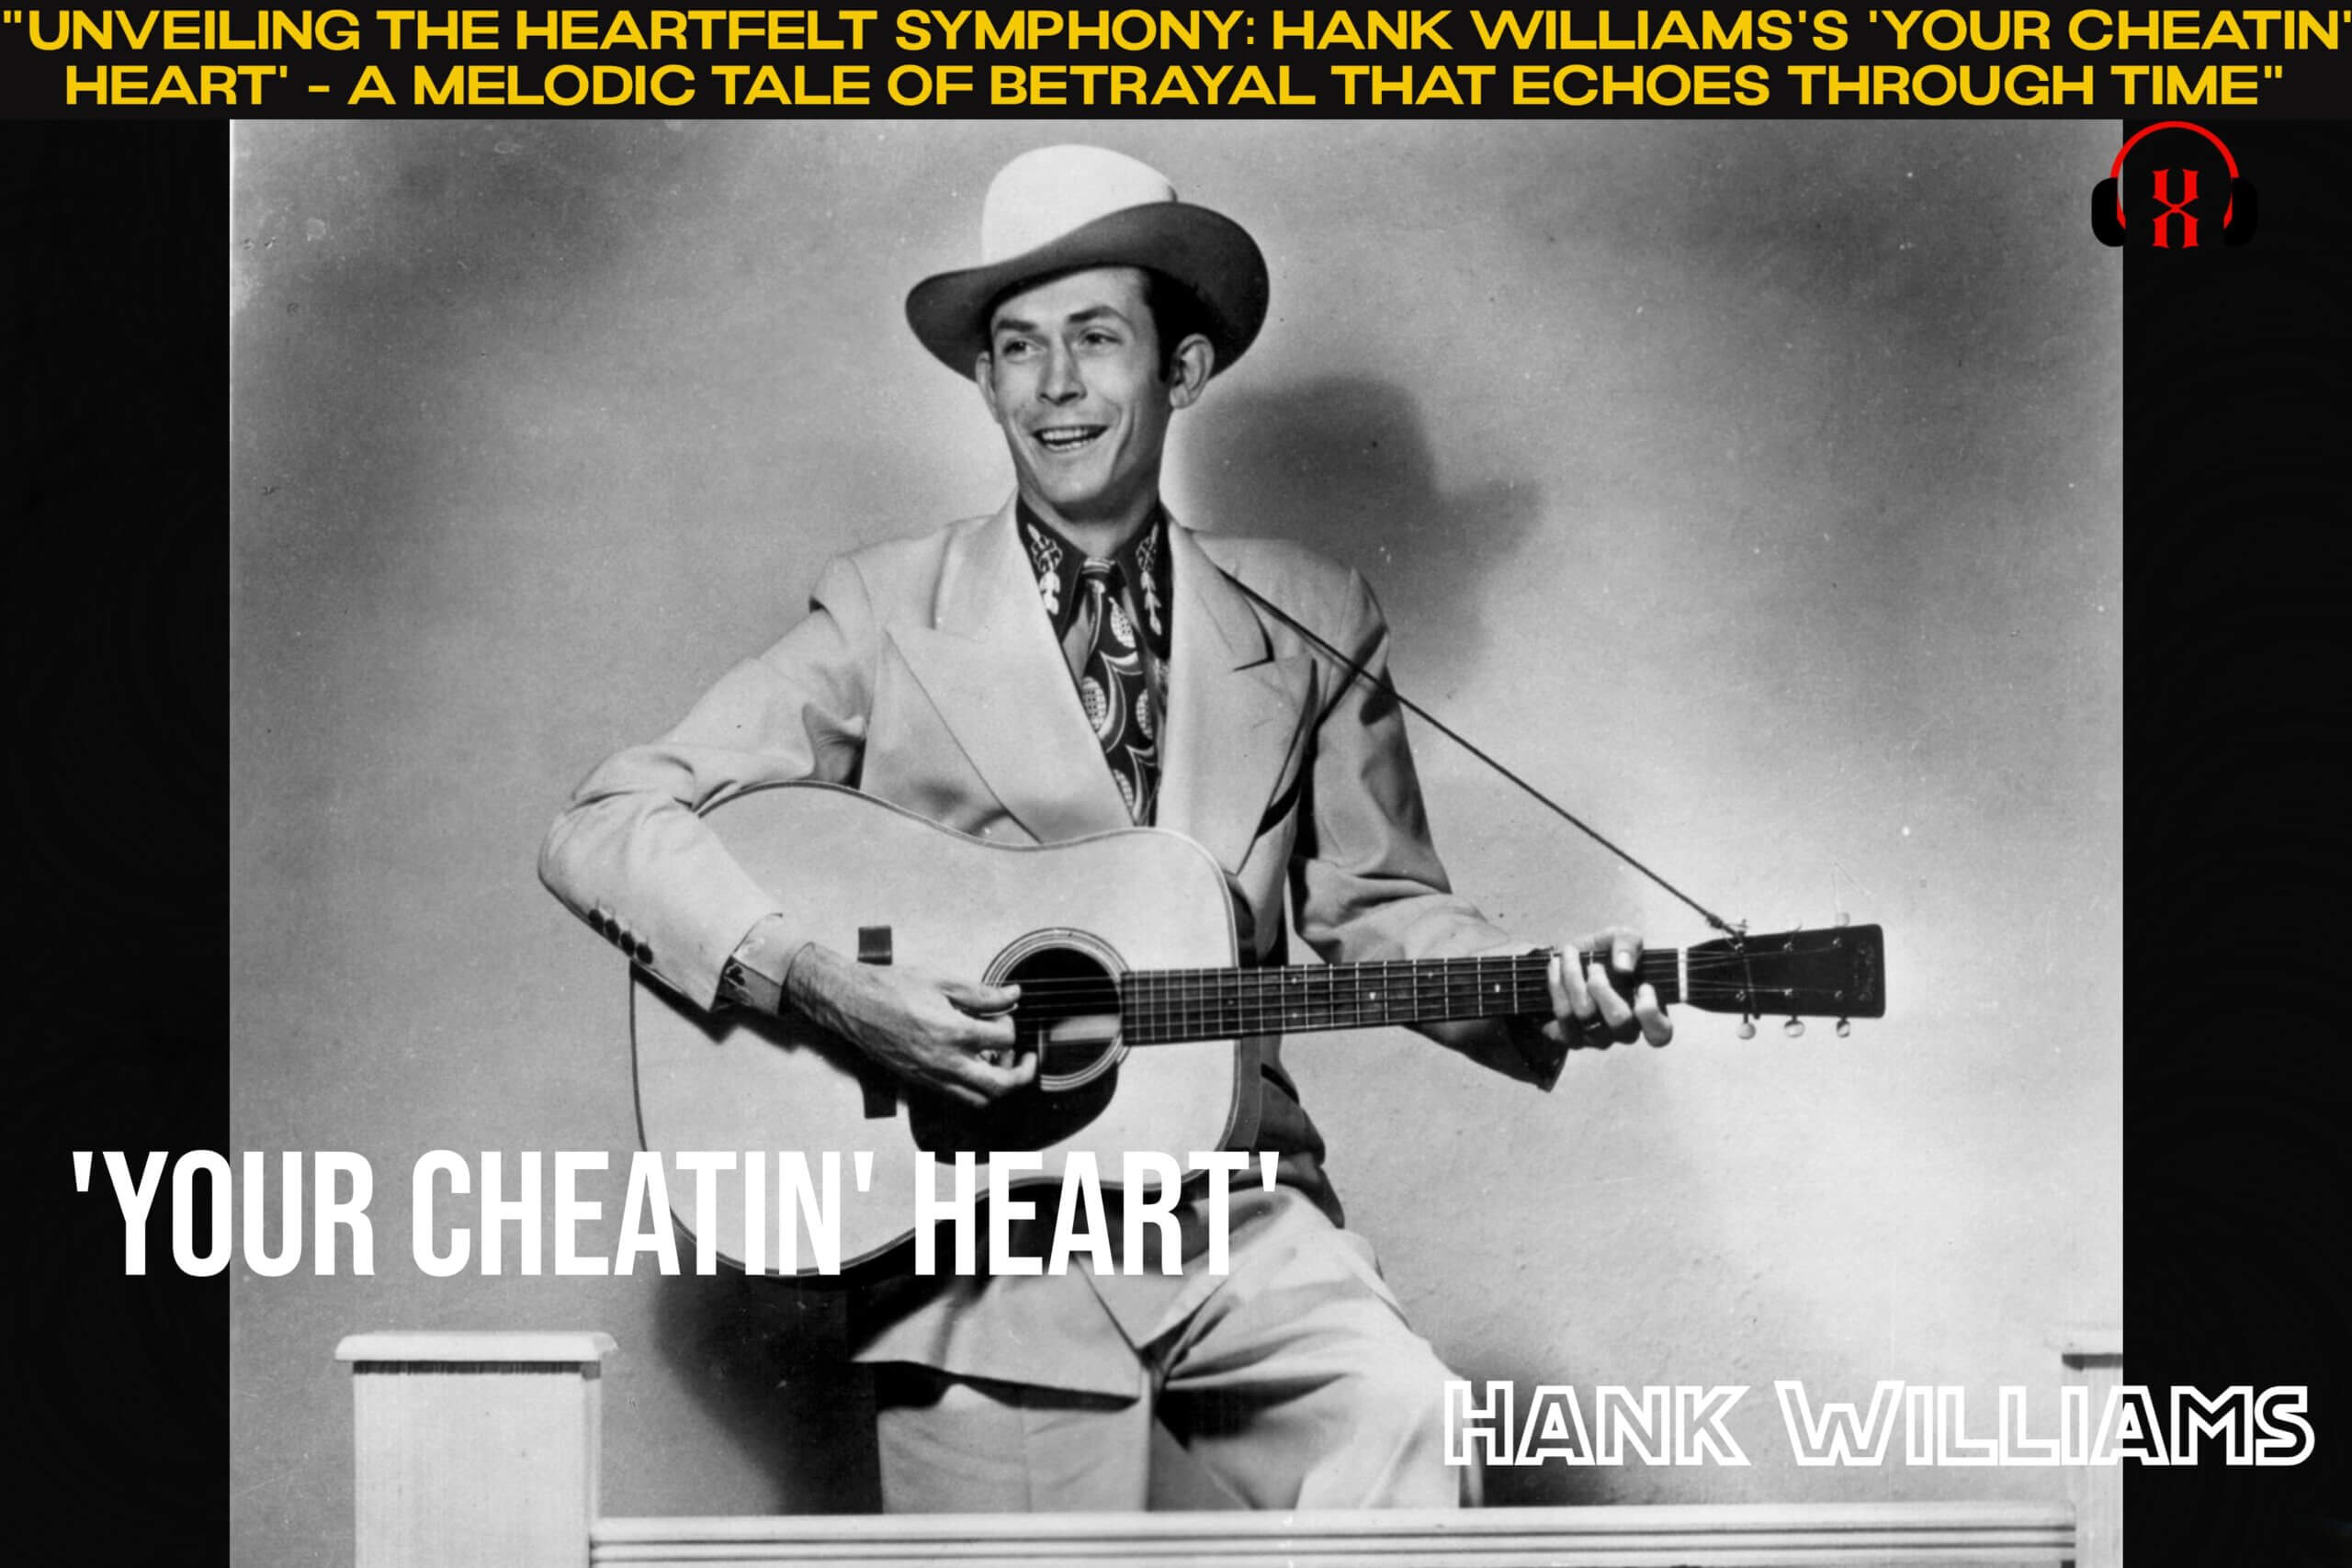 "Unveiling the Heartfelt Symphony: Hank Williams's 'Your Cheatin' Heart' - A Melodic Tale of Betrayal That Echoes Through Time"